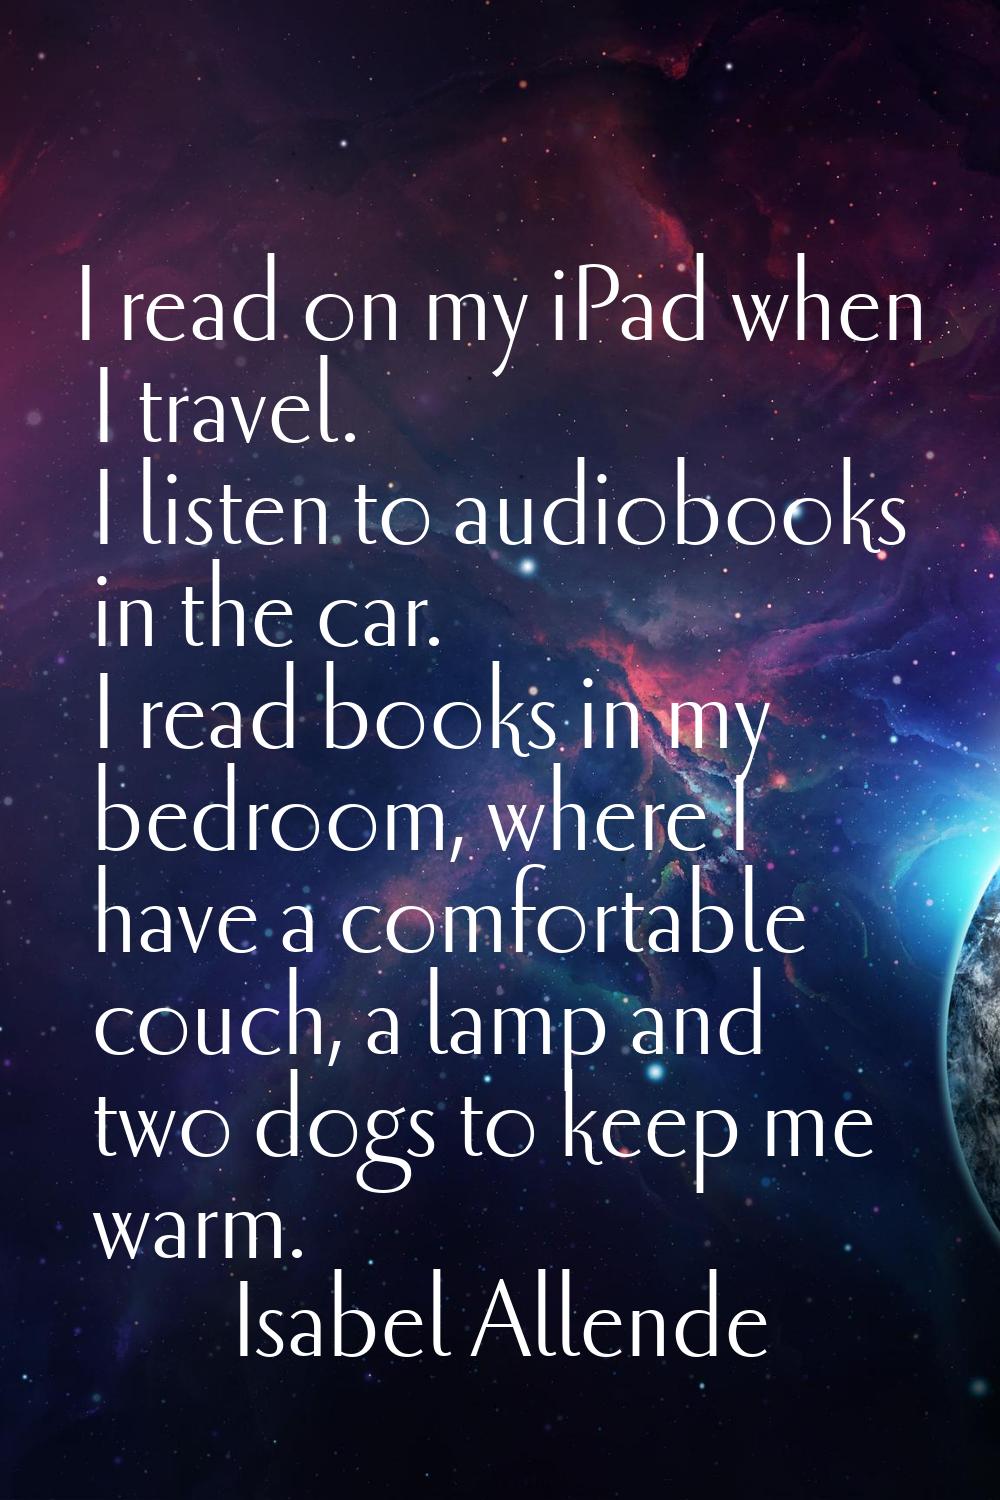 I read on my iPad when I travel. I listen to audiobooks in the car. I read books in my bedroom, whe